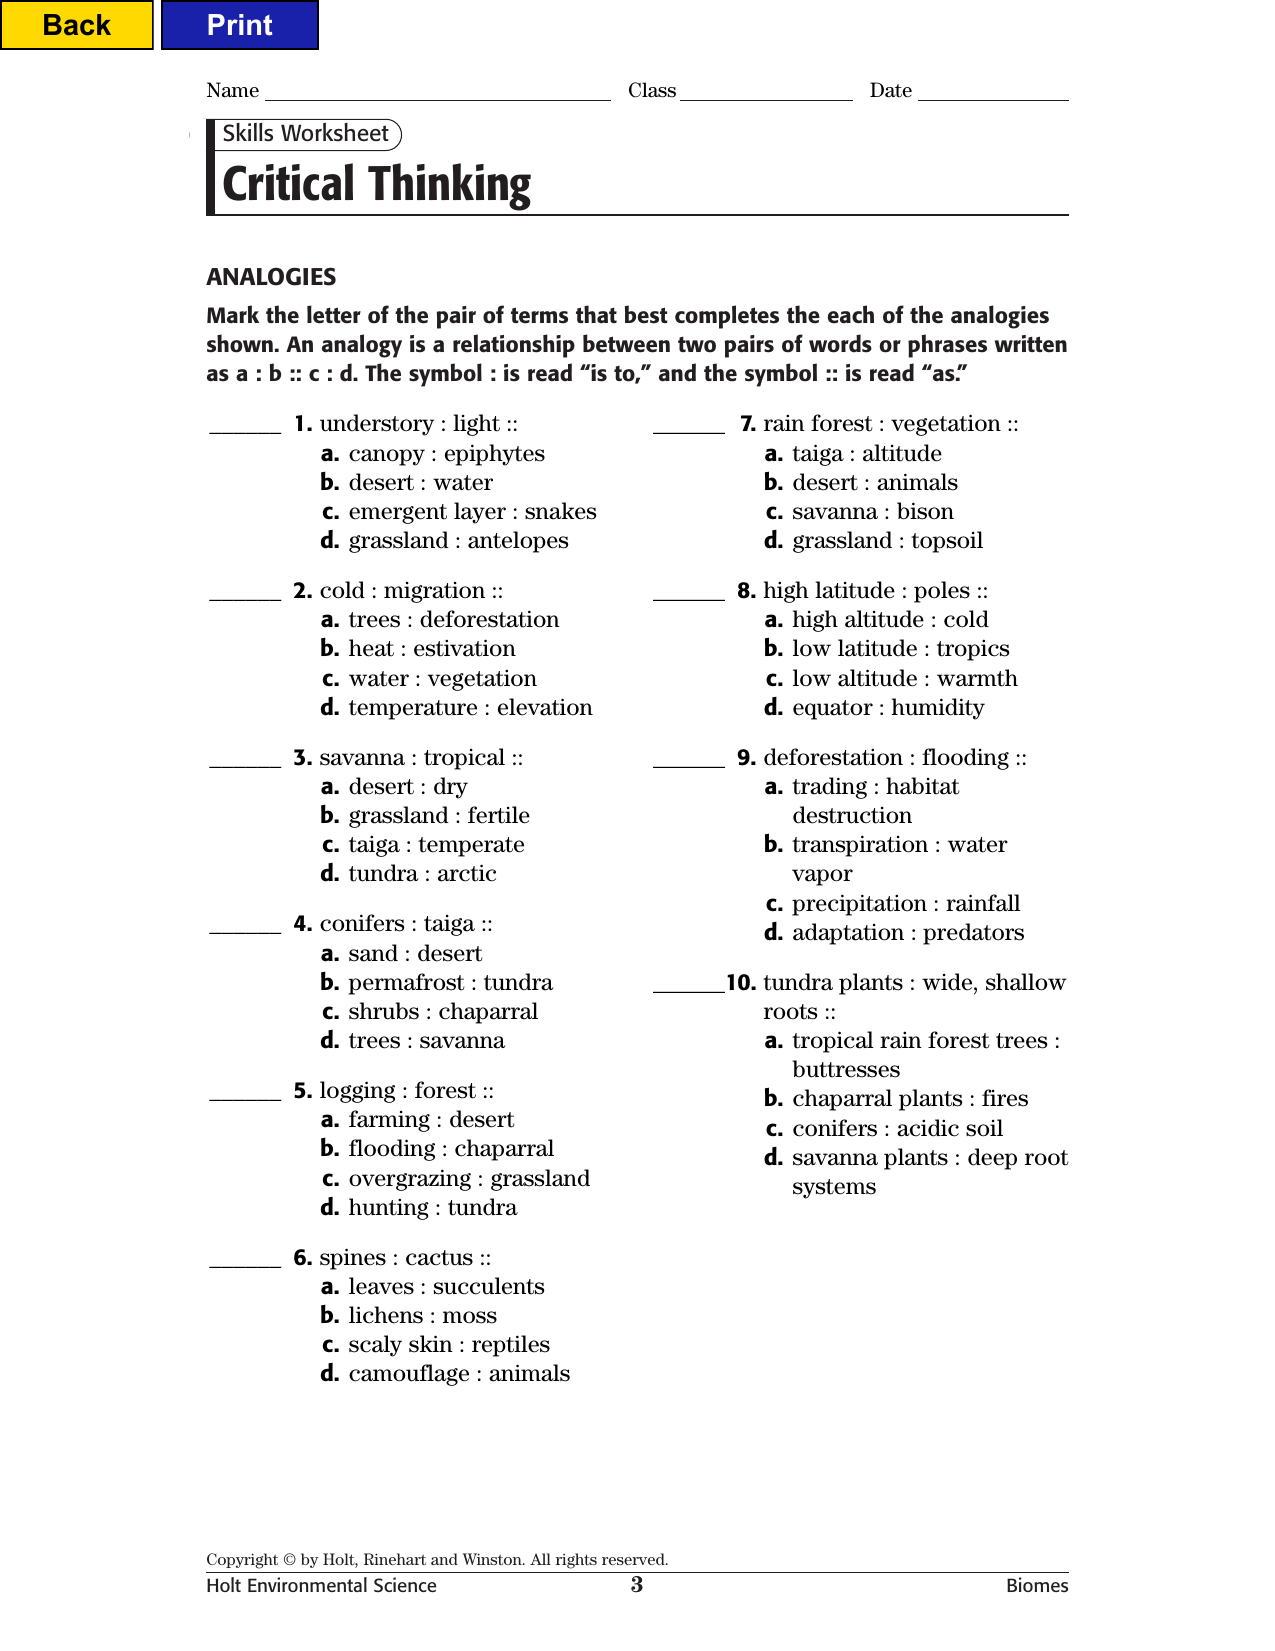 Critical Thinking Together With Skills Worksheet Critical Thinking Analogies Answer Key